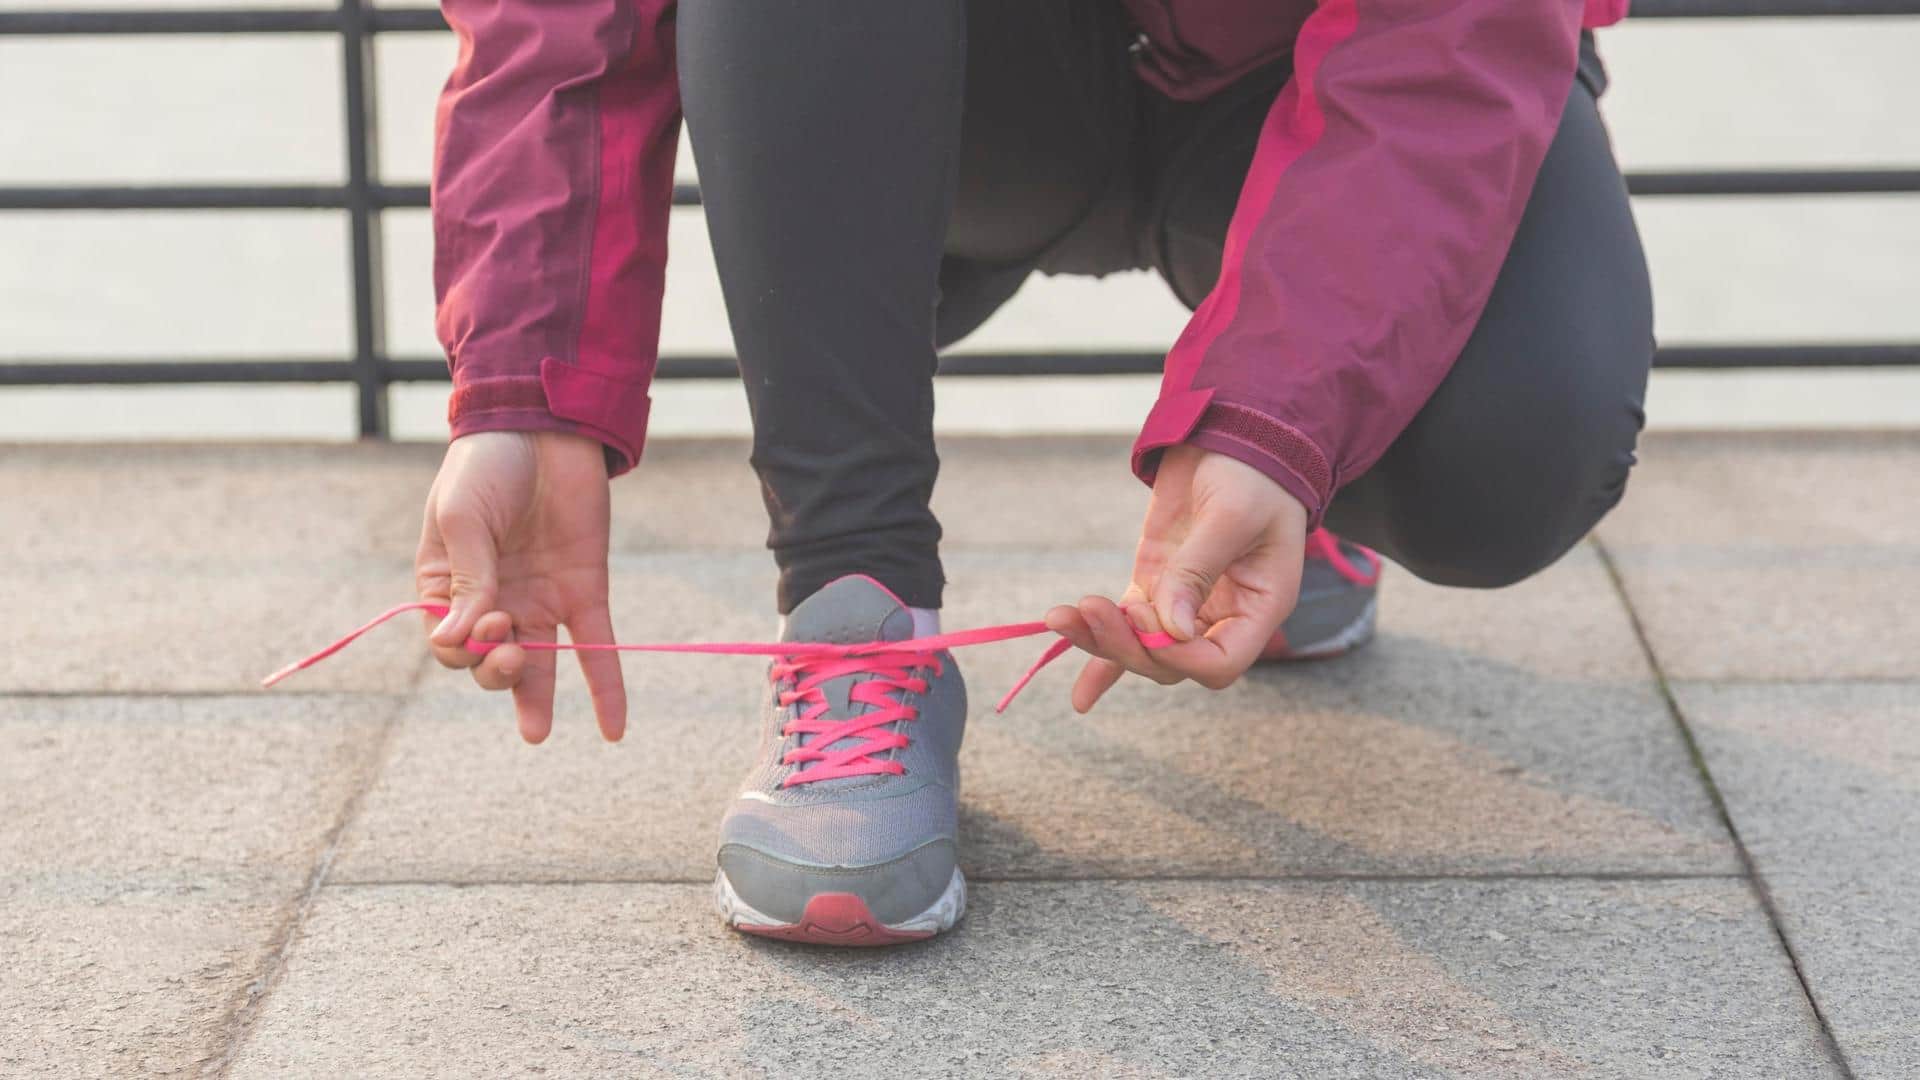 Winter 'fitspiration': 5 ways to stay motivated to exercise